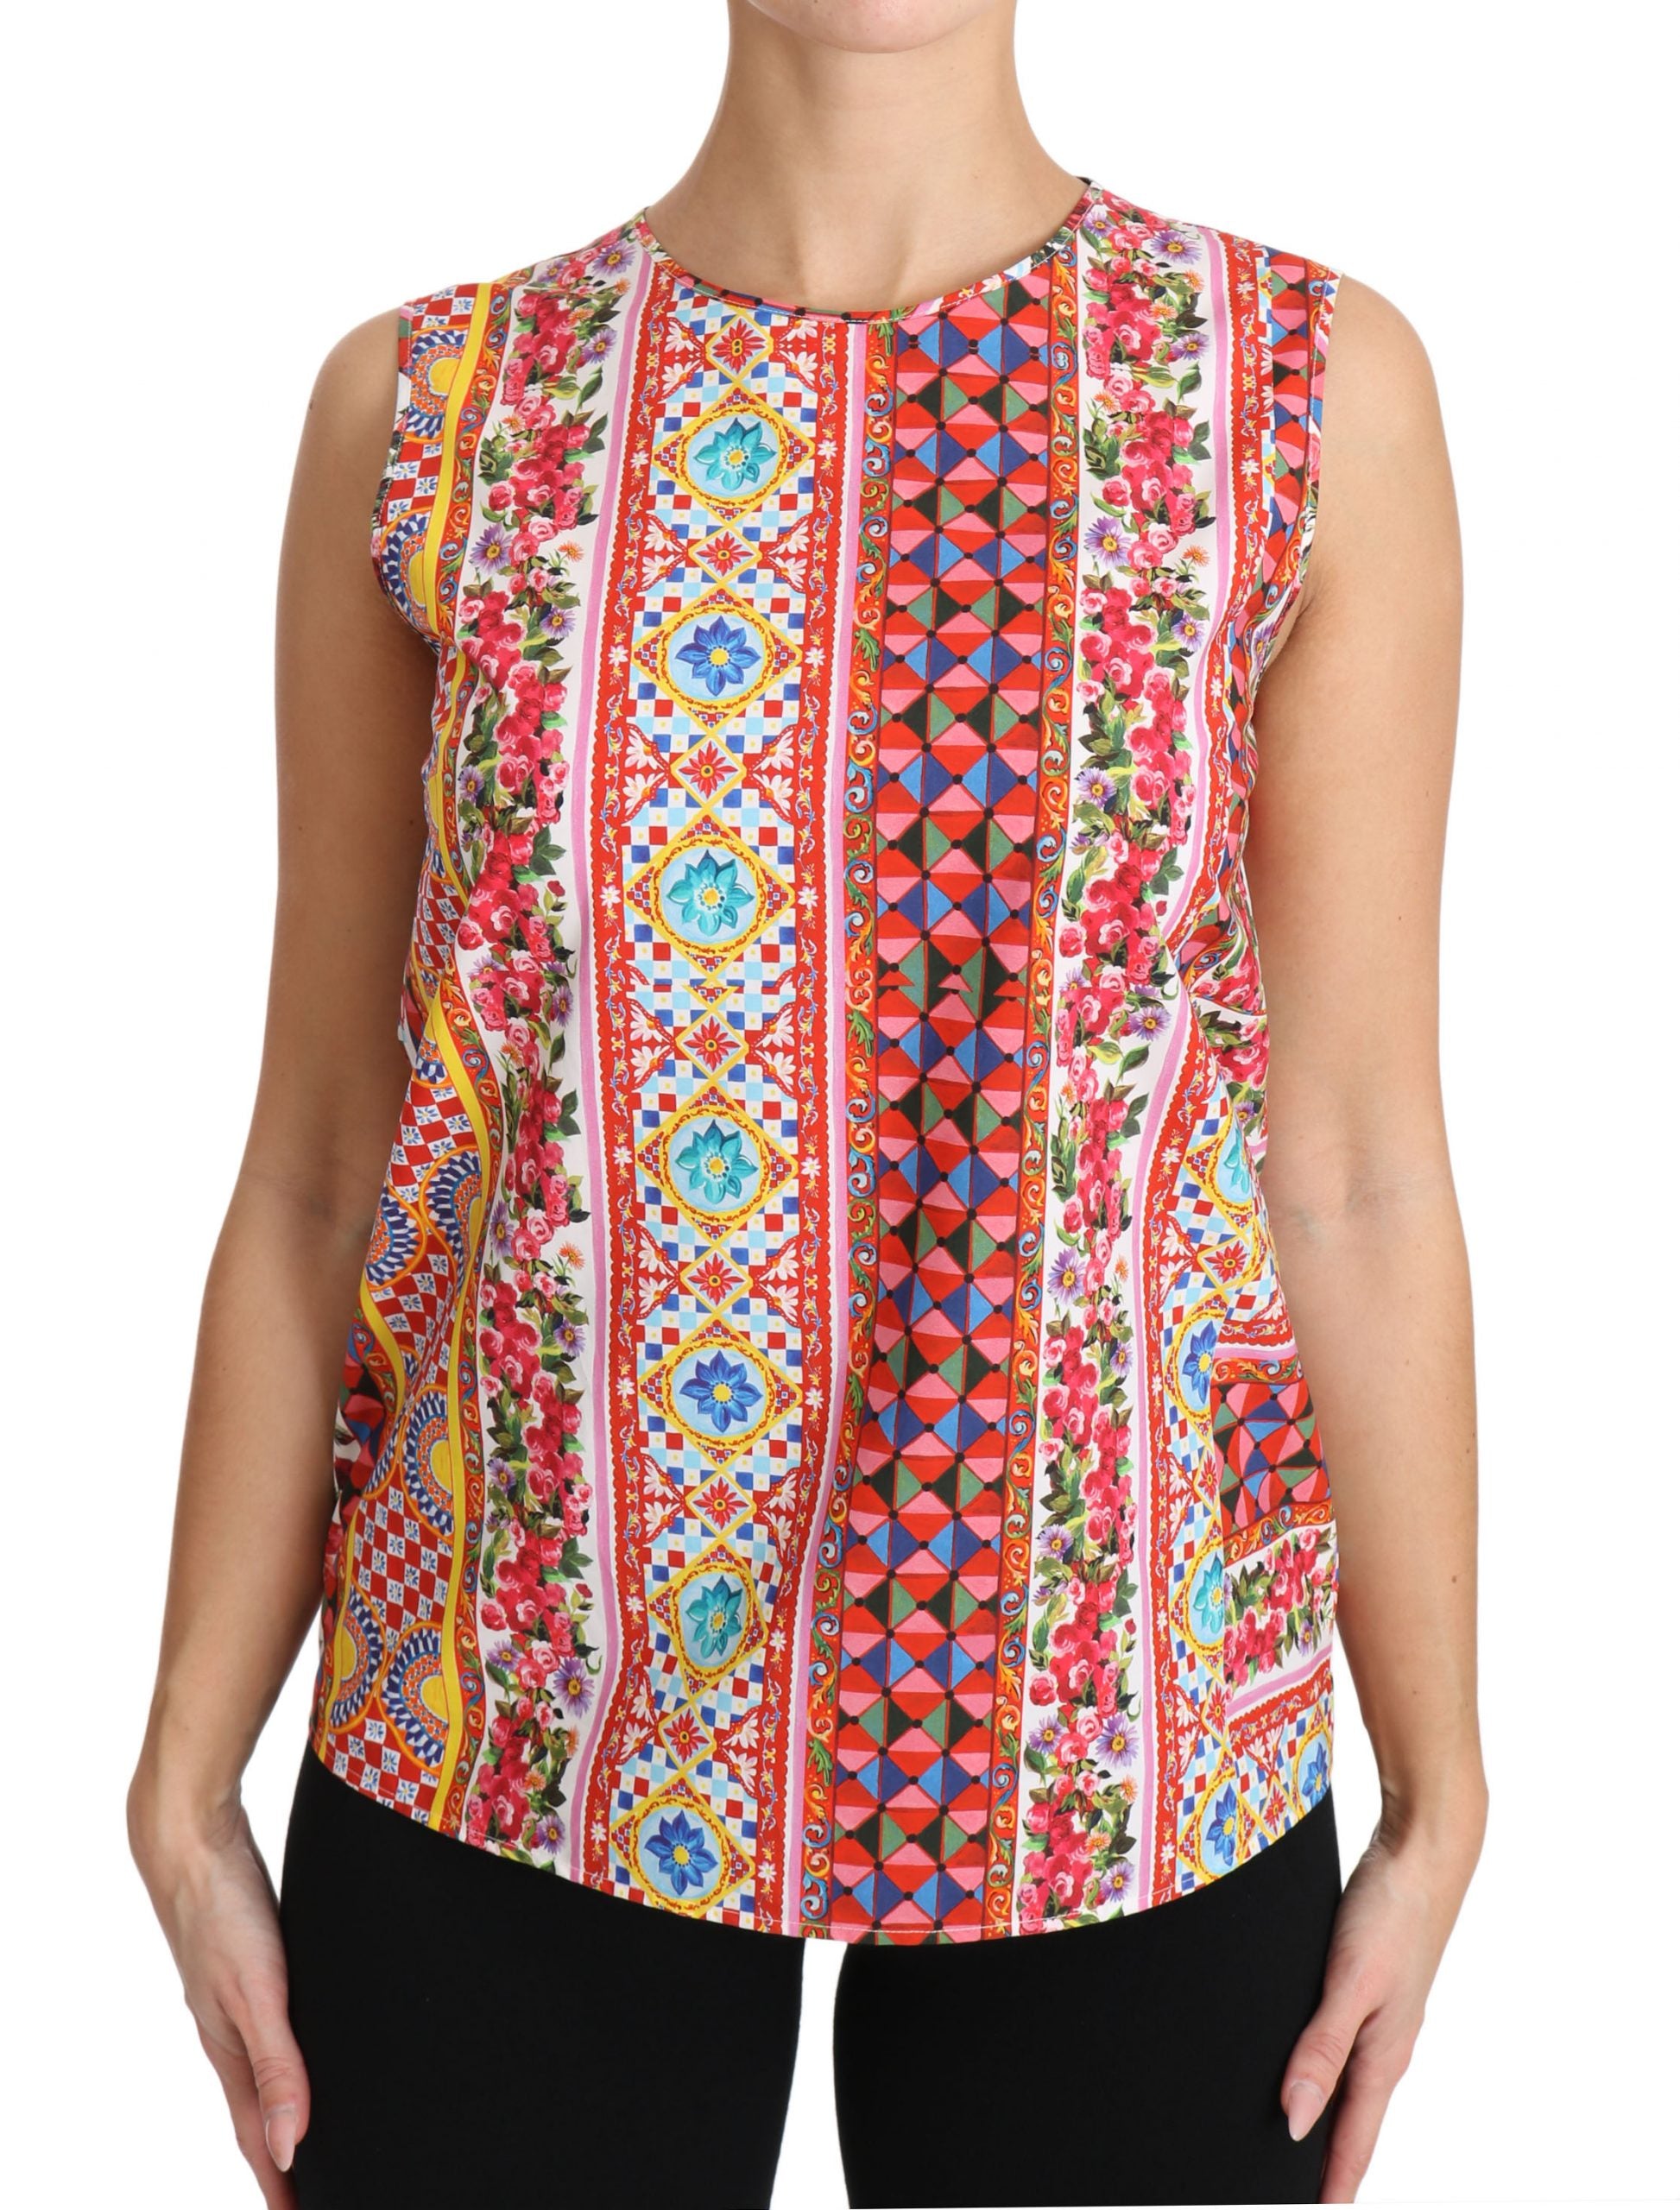 Buy Carretto Print Pure Cotton Tank Top Floral Blouse by Dolce & Gabbana